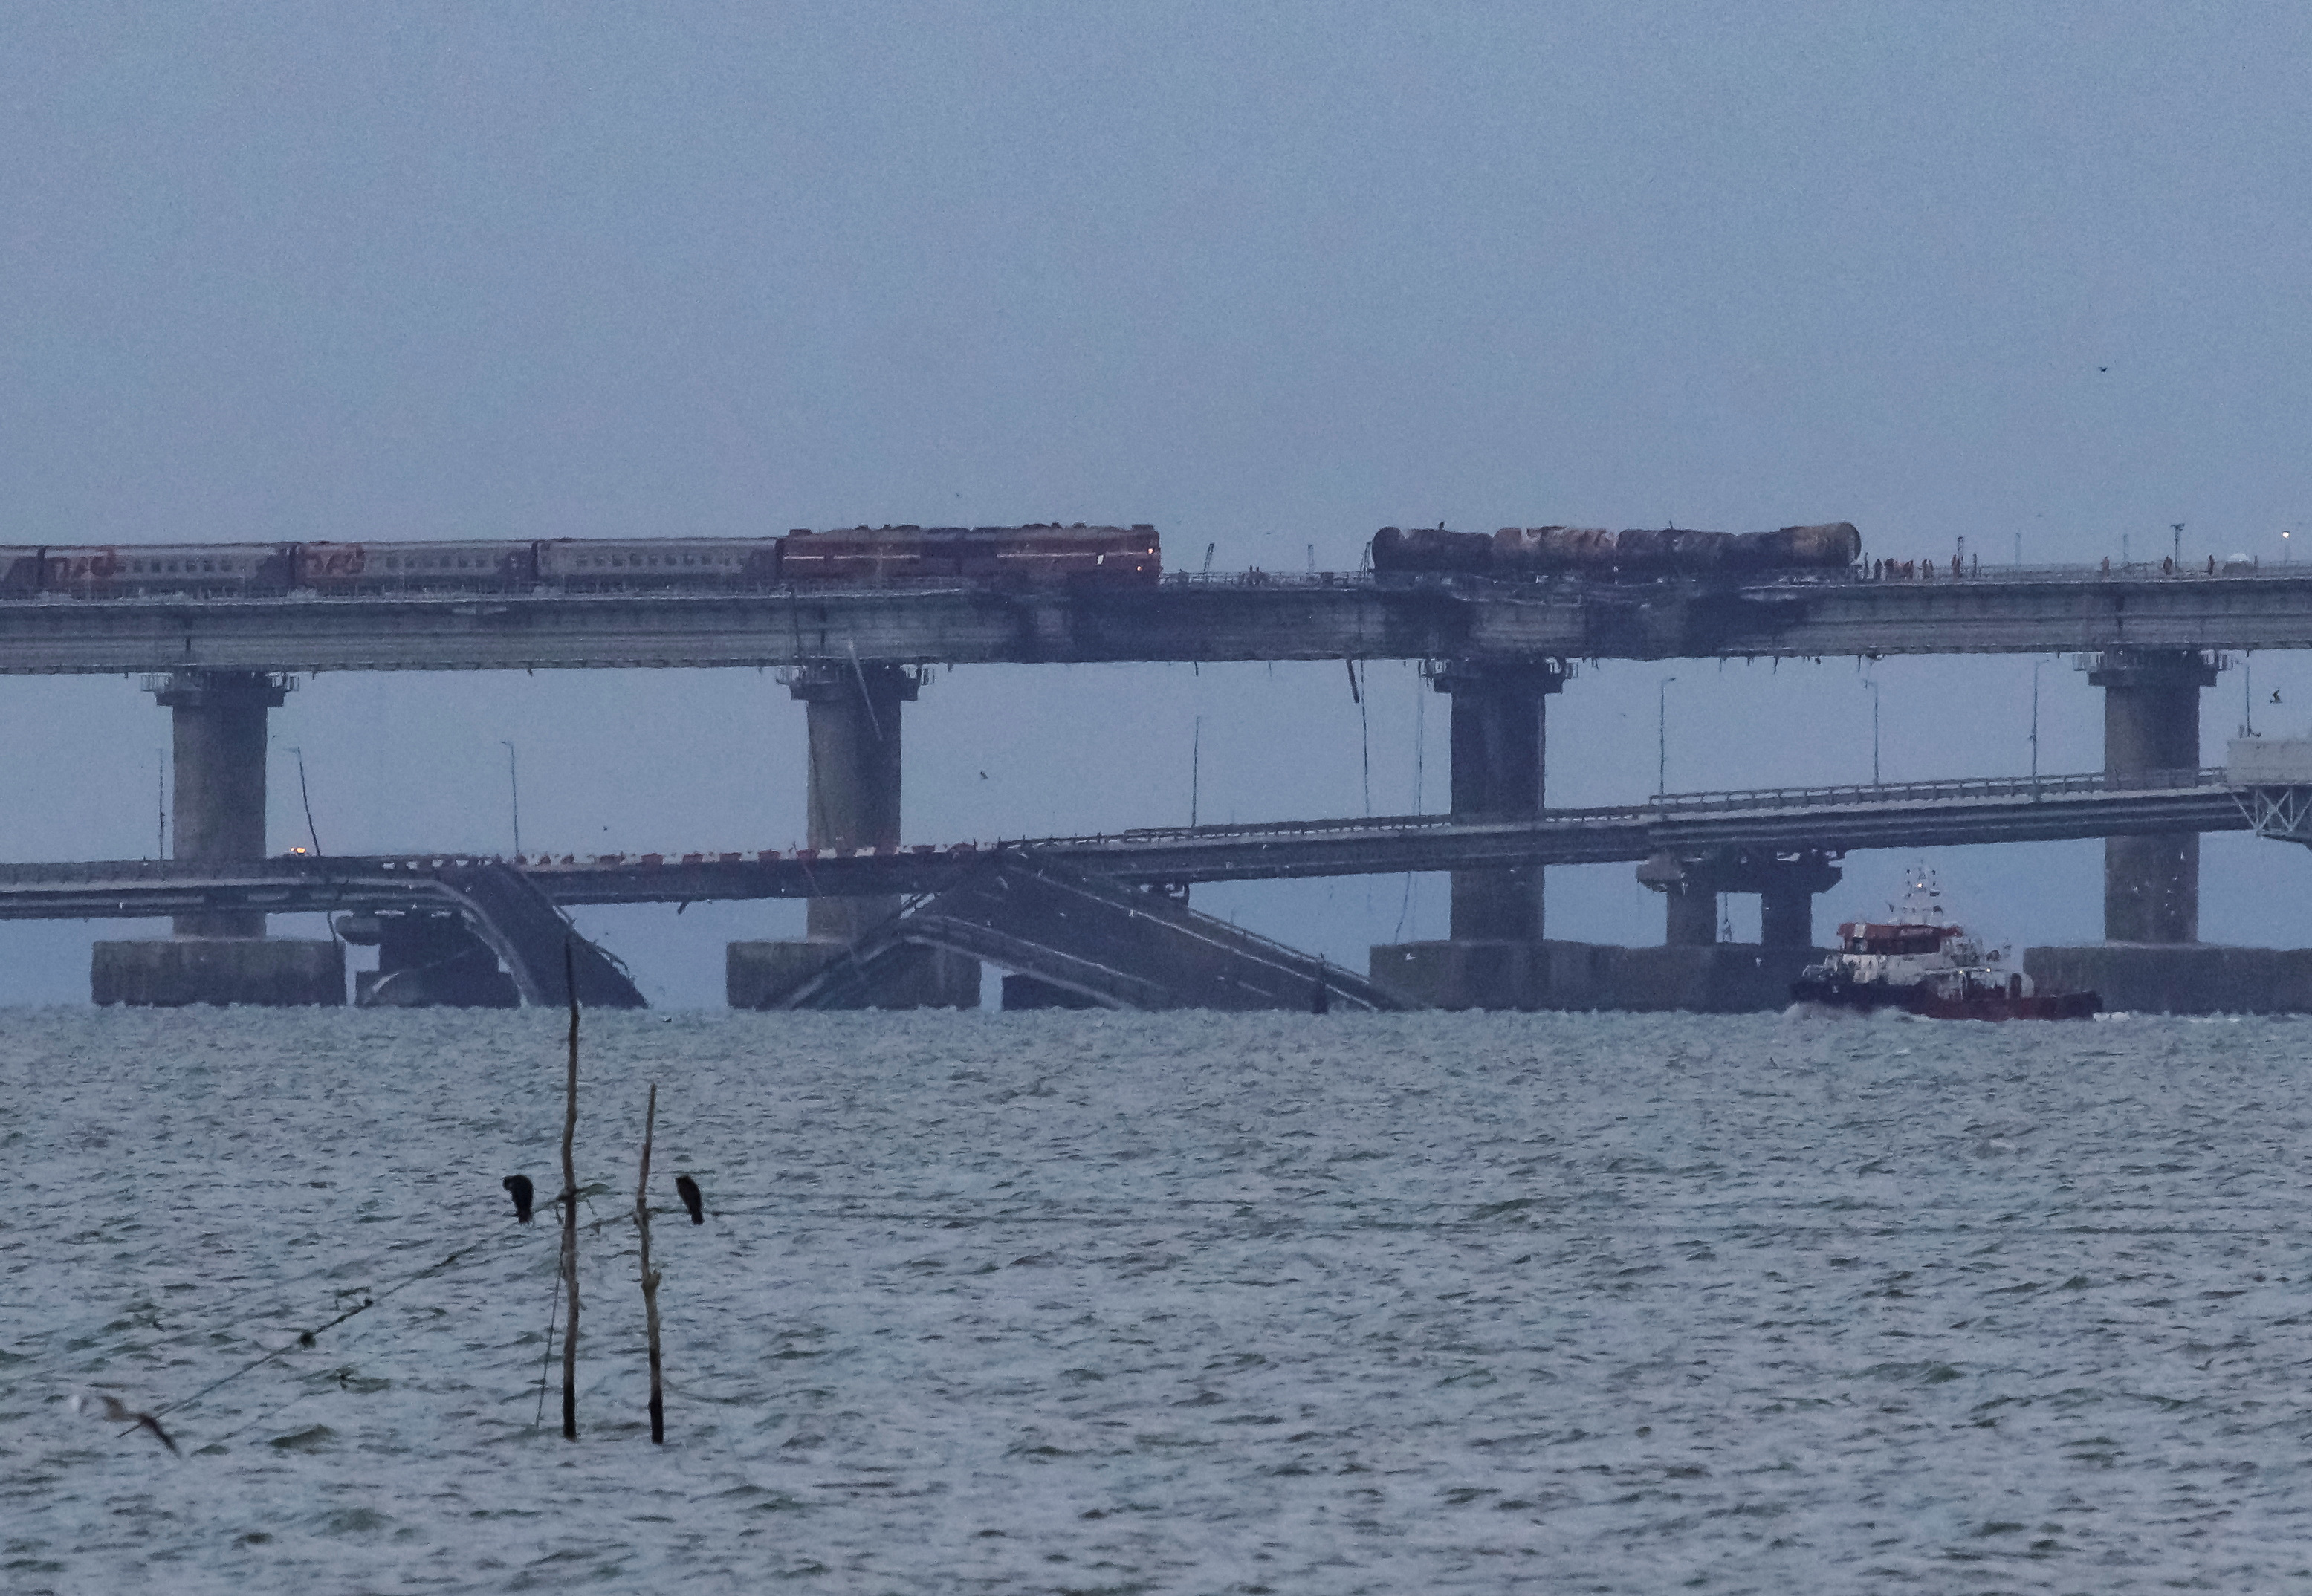 A passenger train approaches fuel tanks burnt on the Kerch bridge, after an explosion destroyed part of it, in the Kerch Strait, Crimea